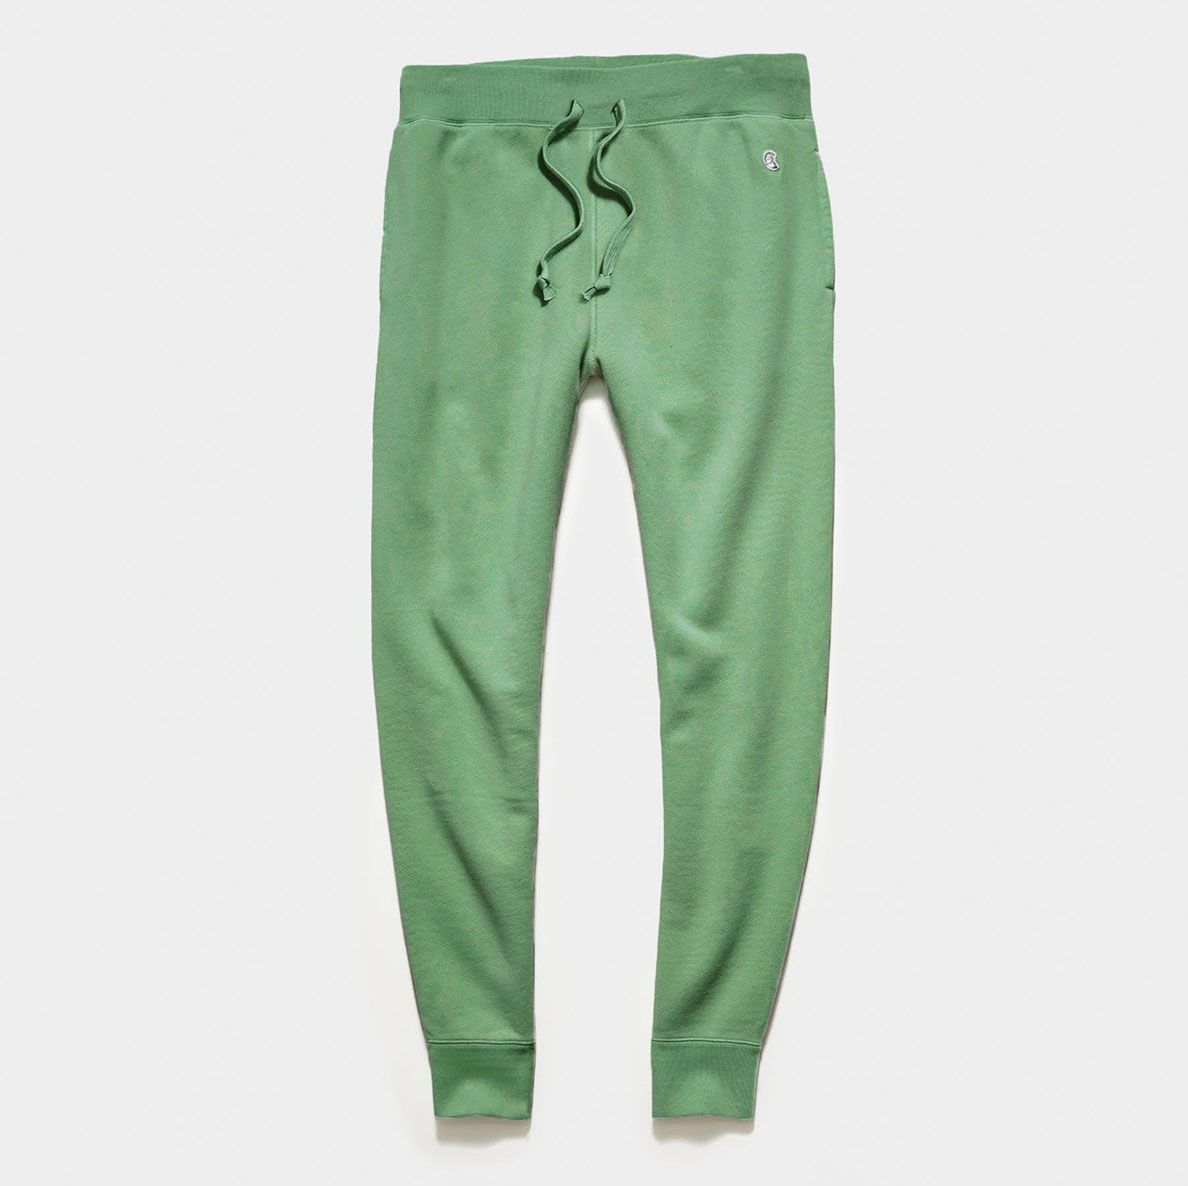 Todd Snyder x Champion Midweight Slim Jogger Sweatpant